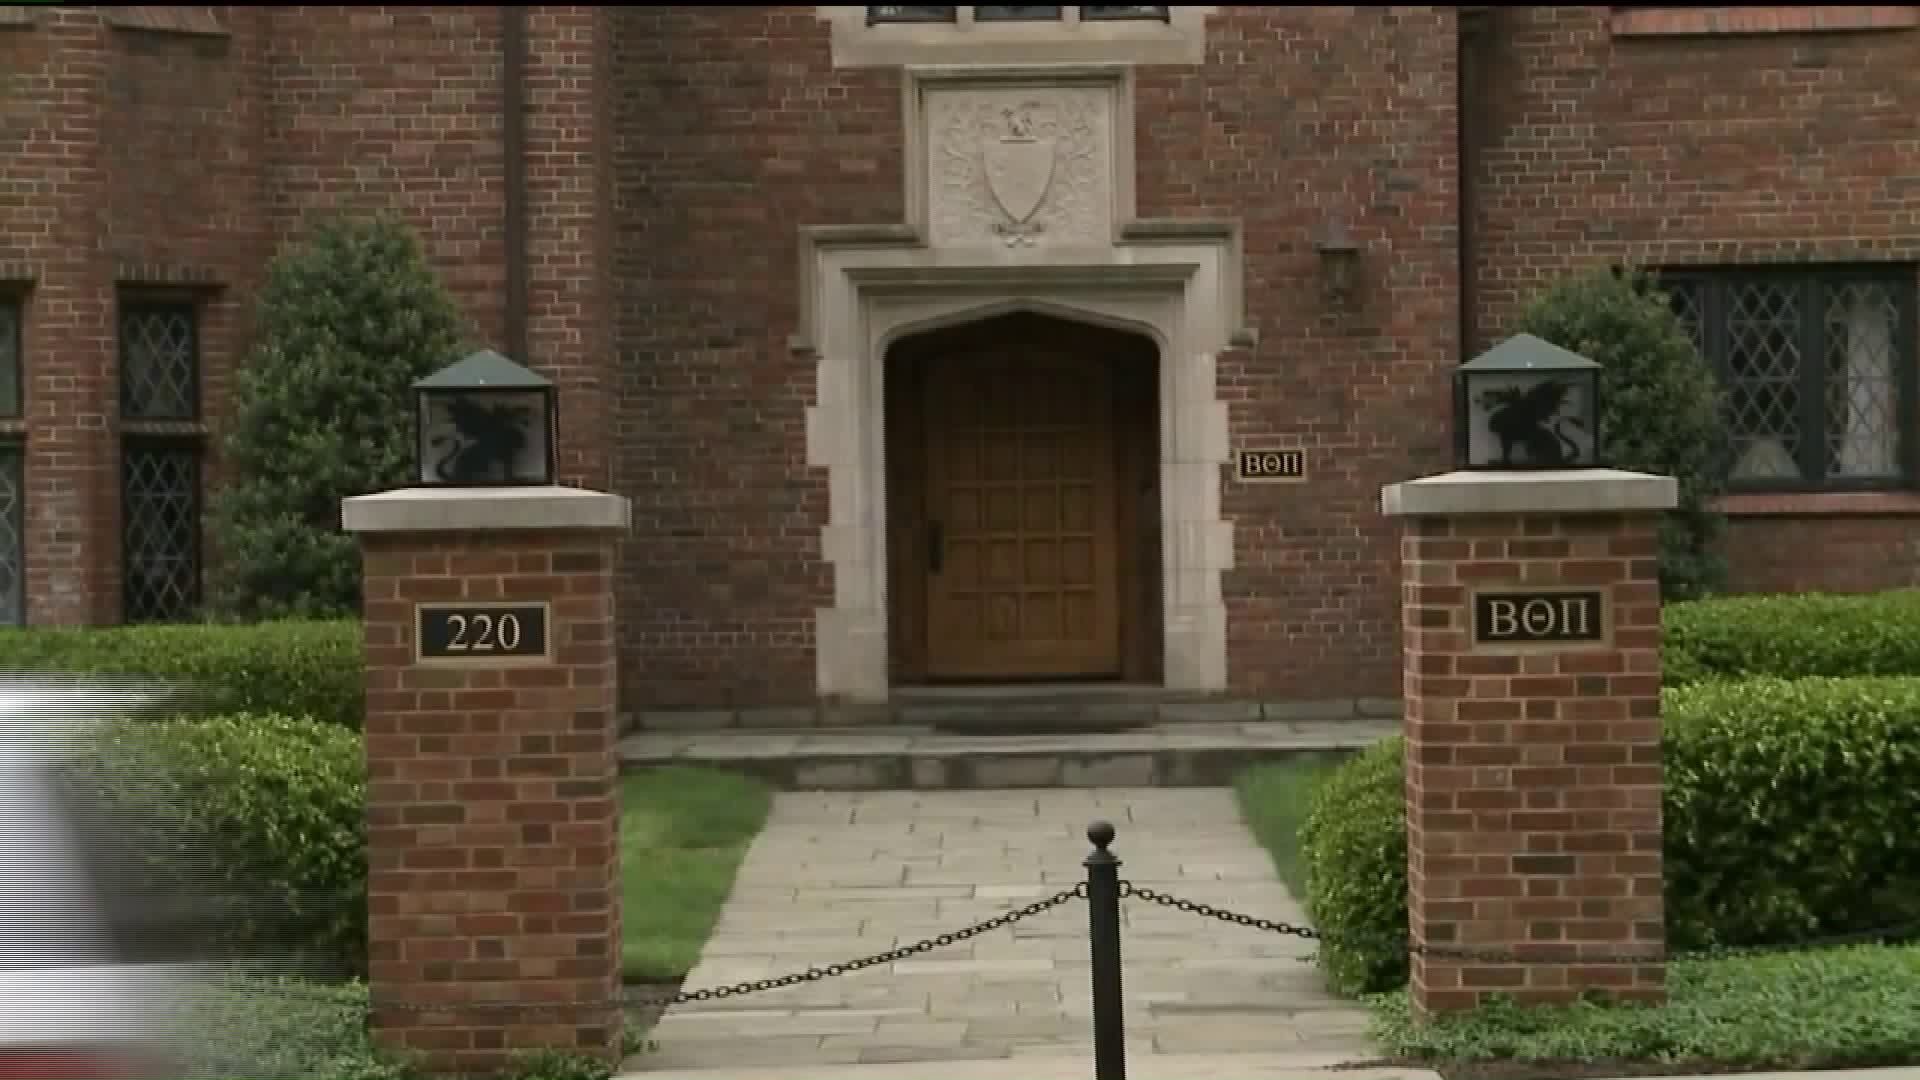 Local Student Implicated in Penn State Frat House Death